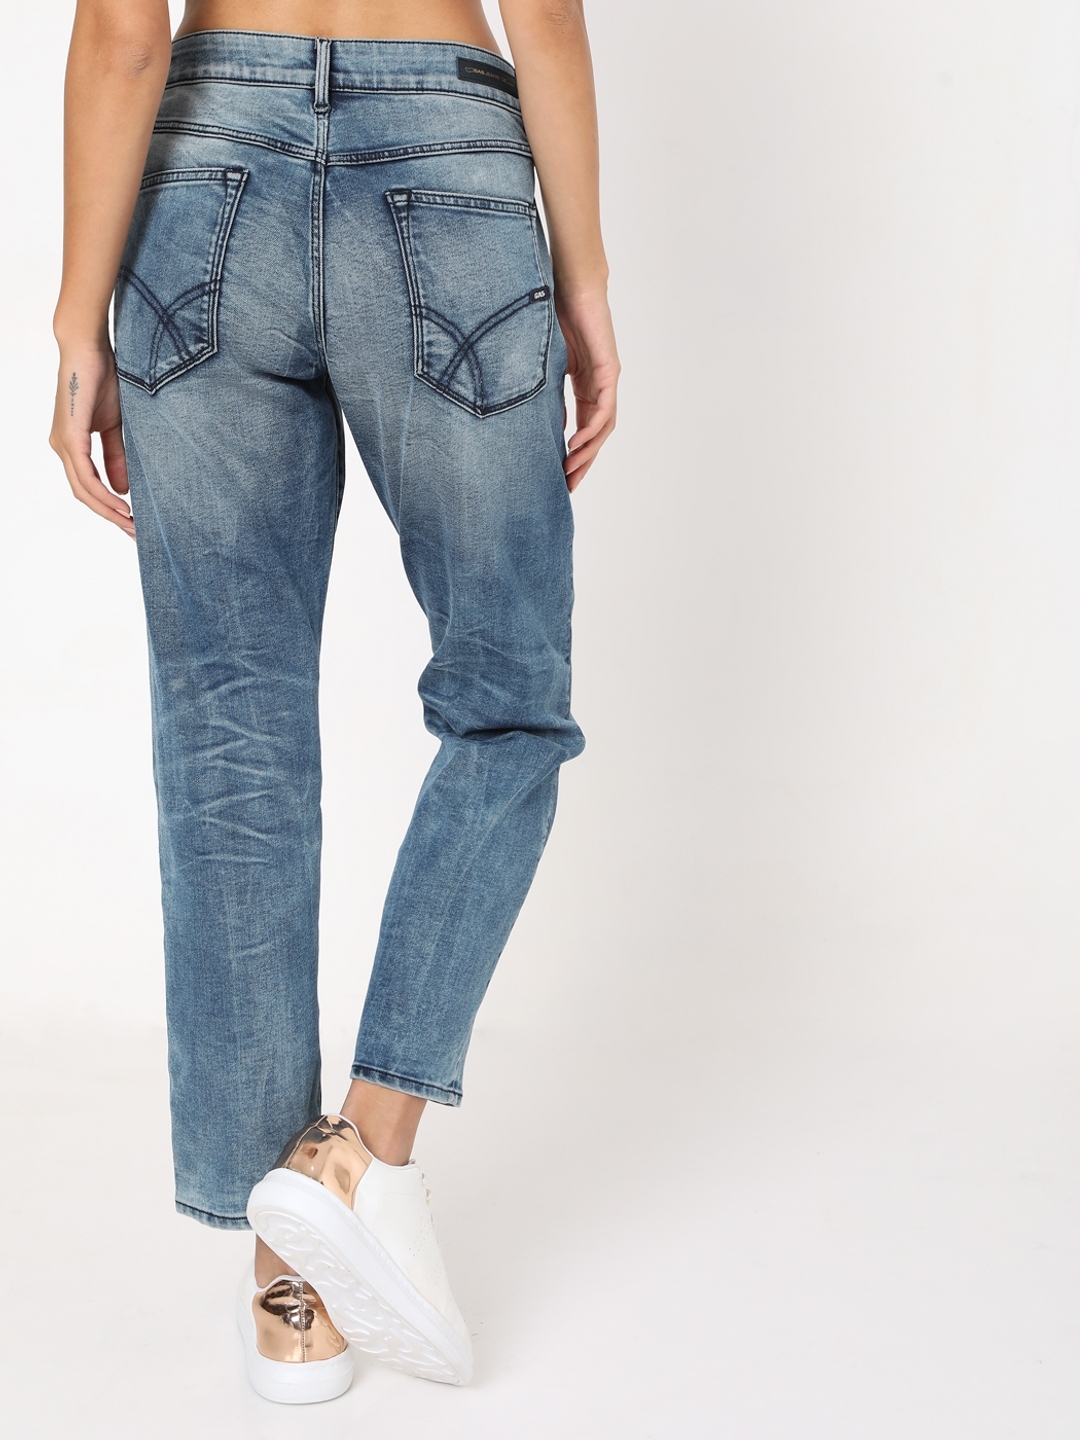 Edgely™ Jeans | Shop Edgy Jeans For Women | maurices